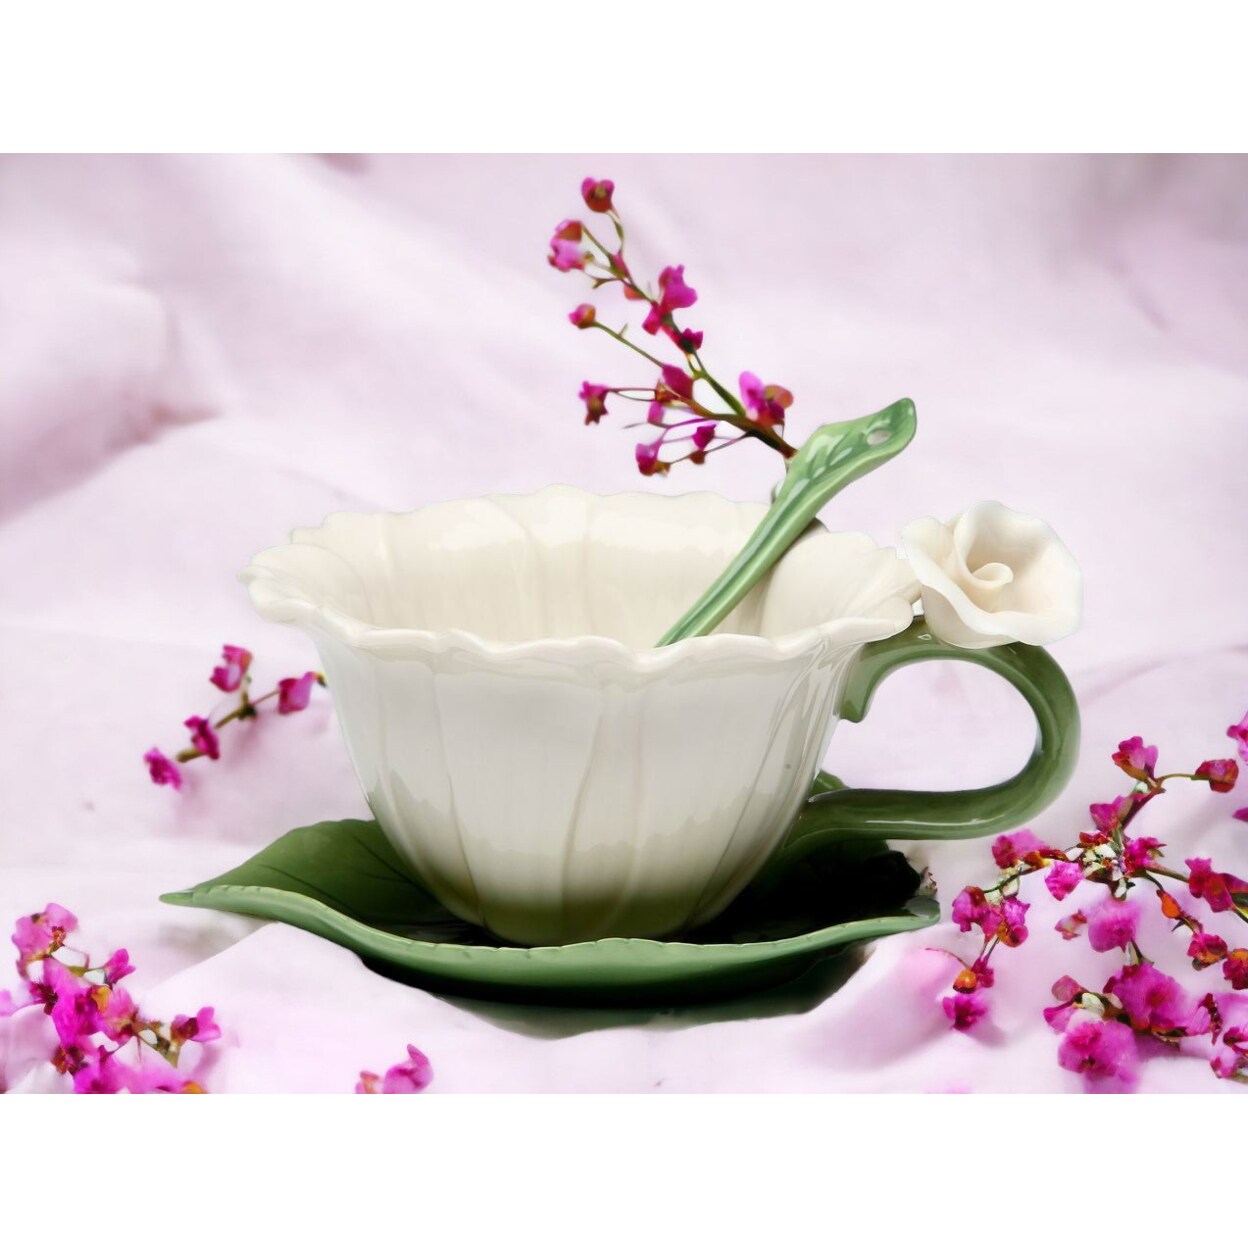 kevinsgiftshoppe Ceramic White Daisy Flower Cup and Saucer-2 Sets    Tea Party Decor Cafe Decor